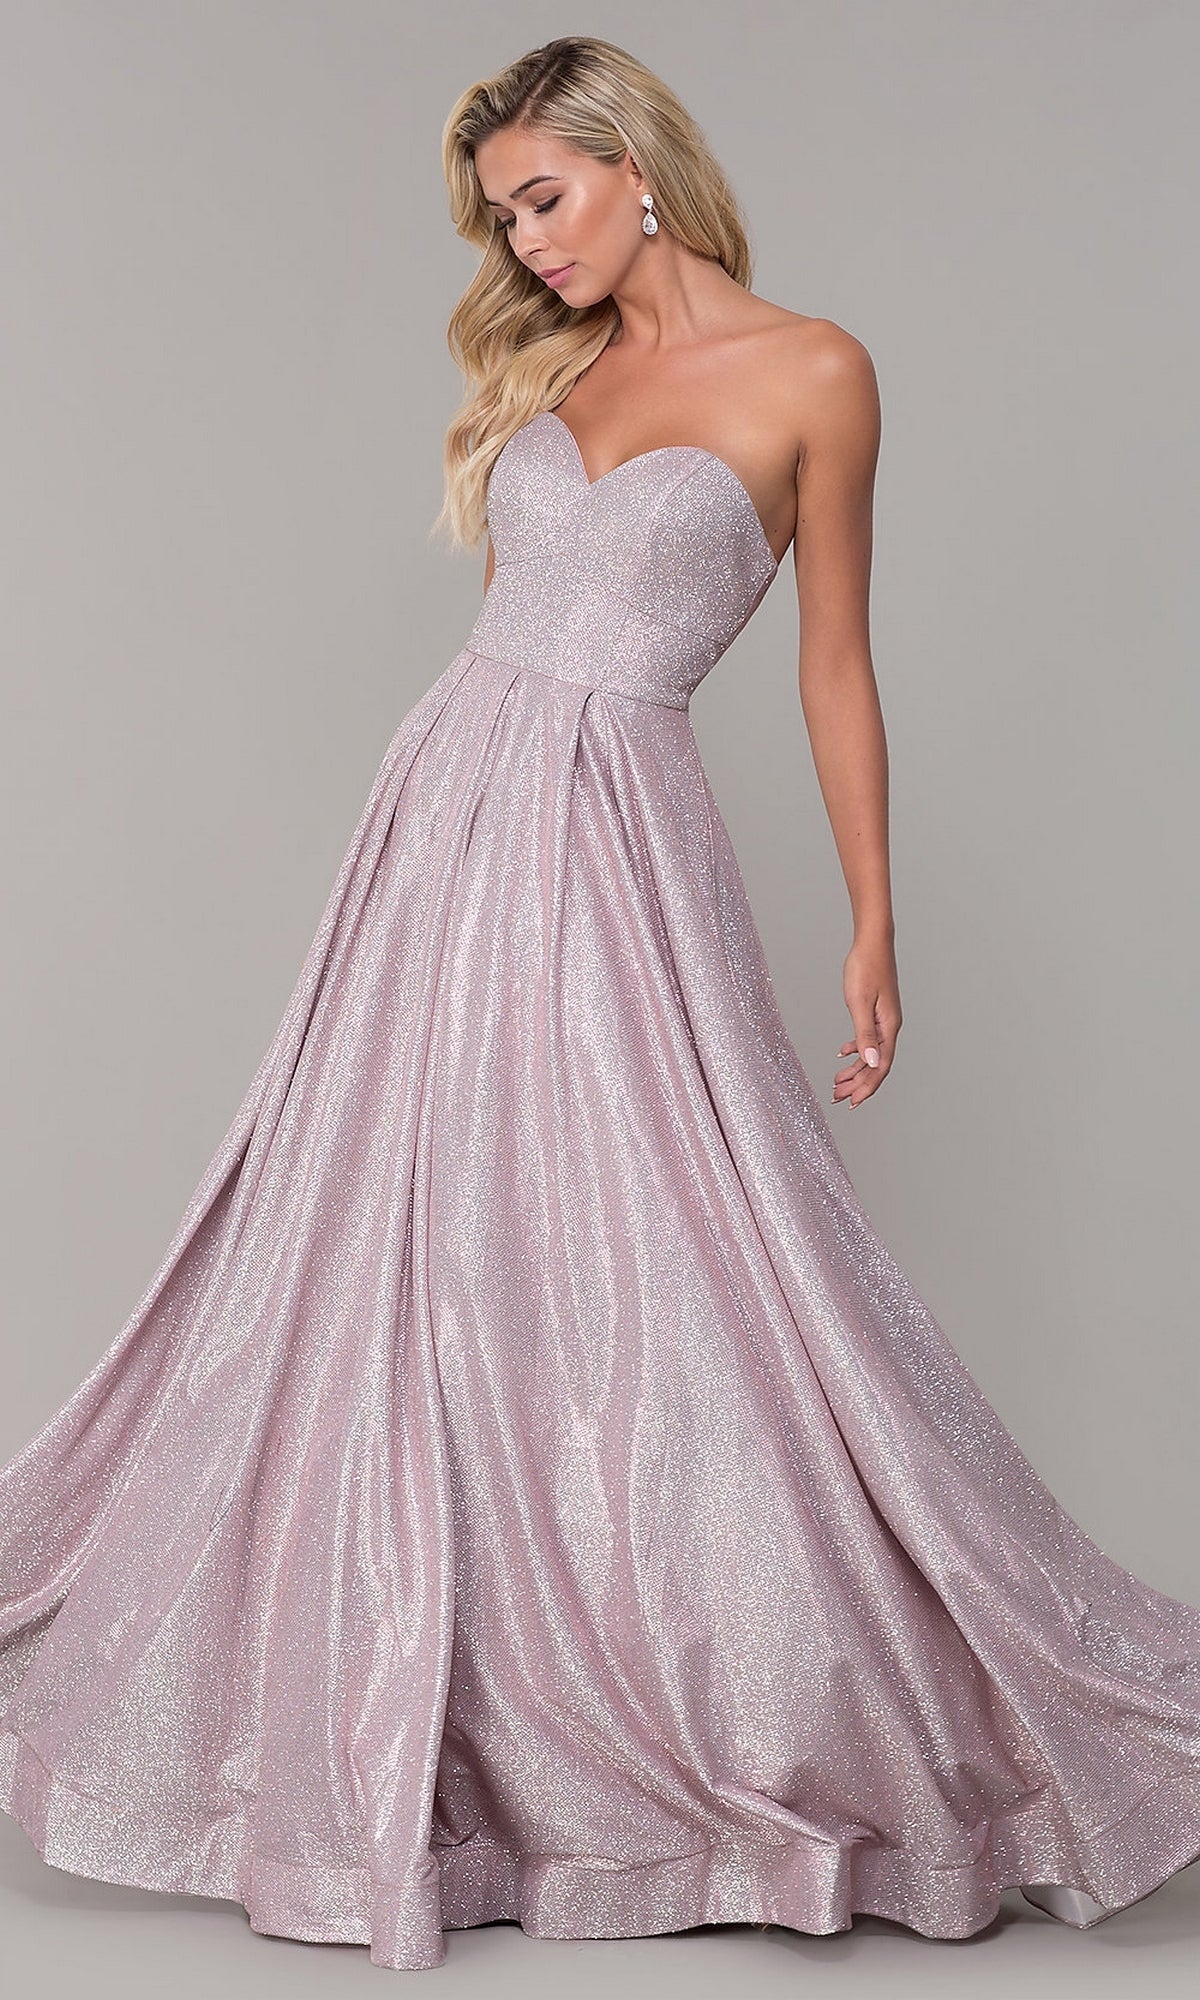 Dusty Pink Strapless Sweetheart Glitter Formal Ball Gown